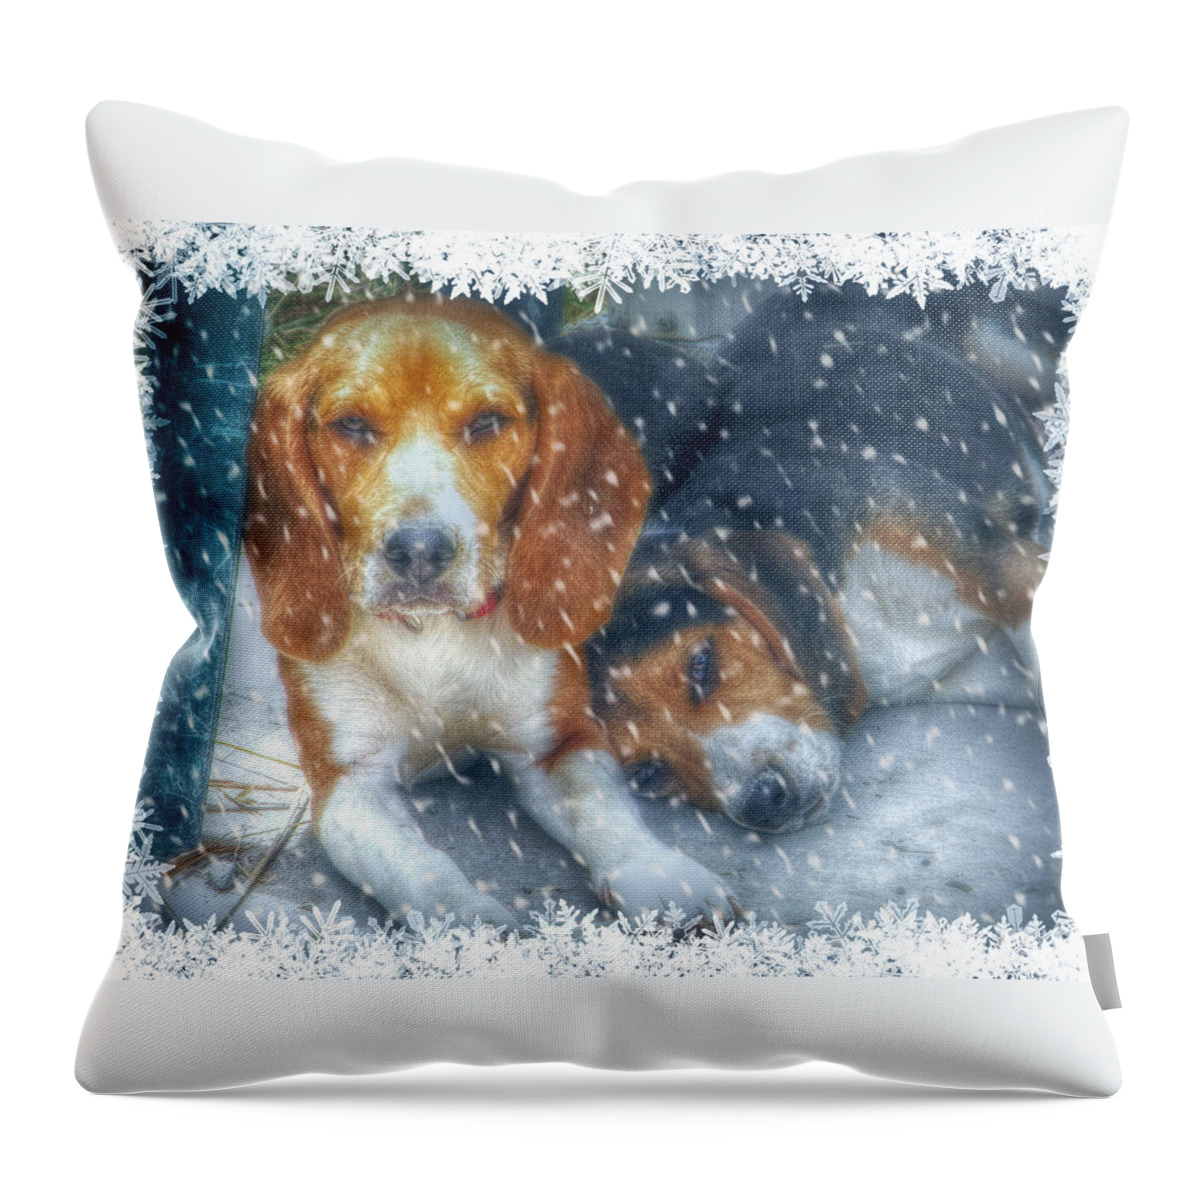 Beagles Throw Pillow featuring the photograph Christmas Brothers by Amanda Eberly